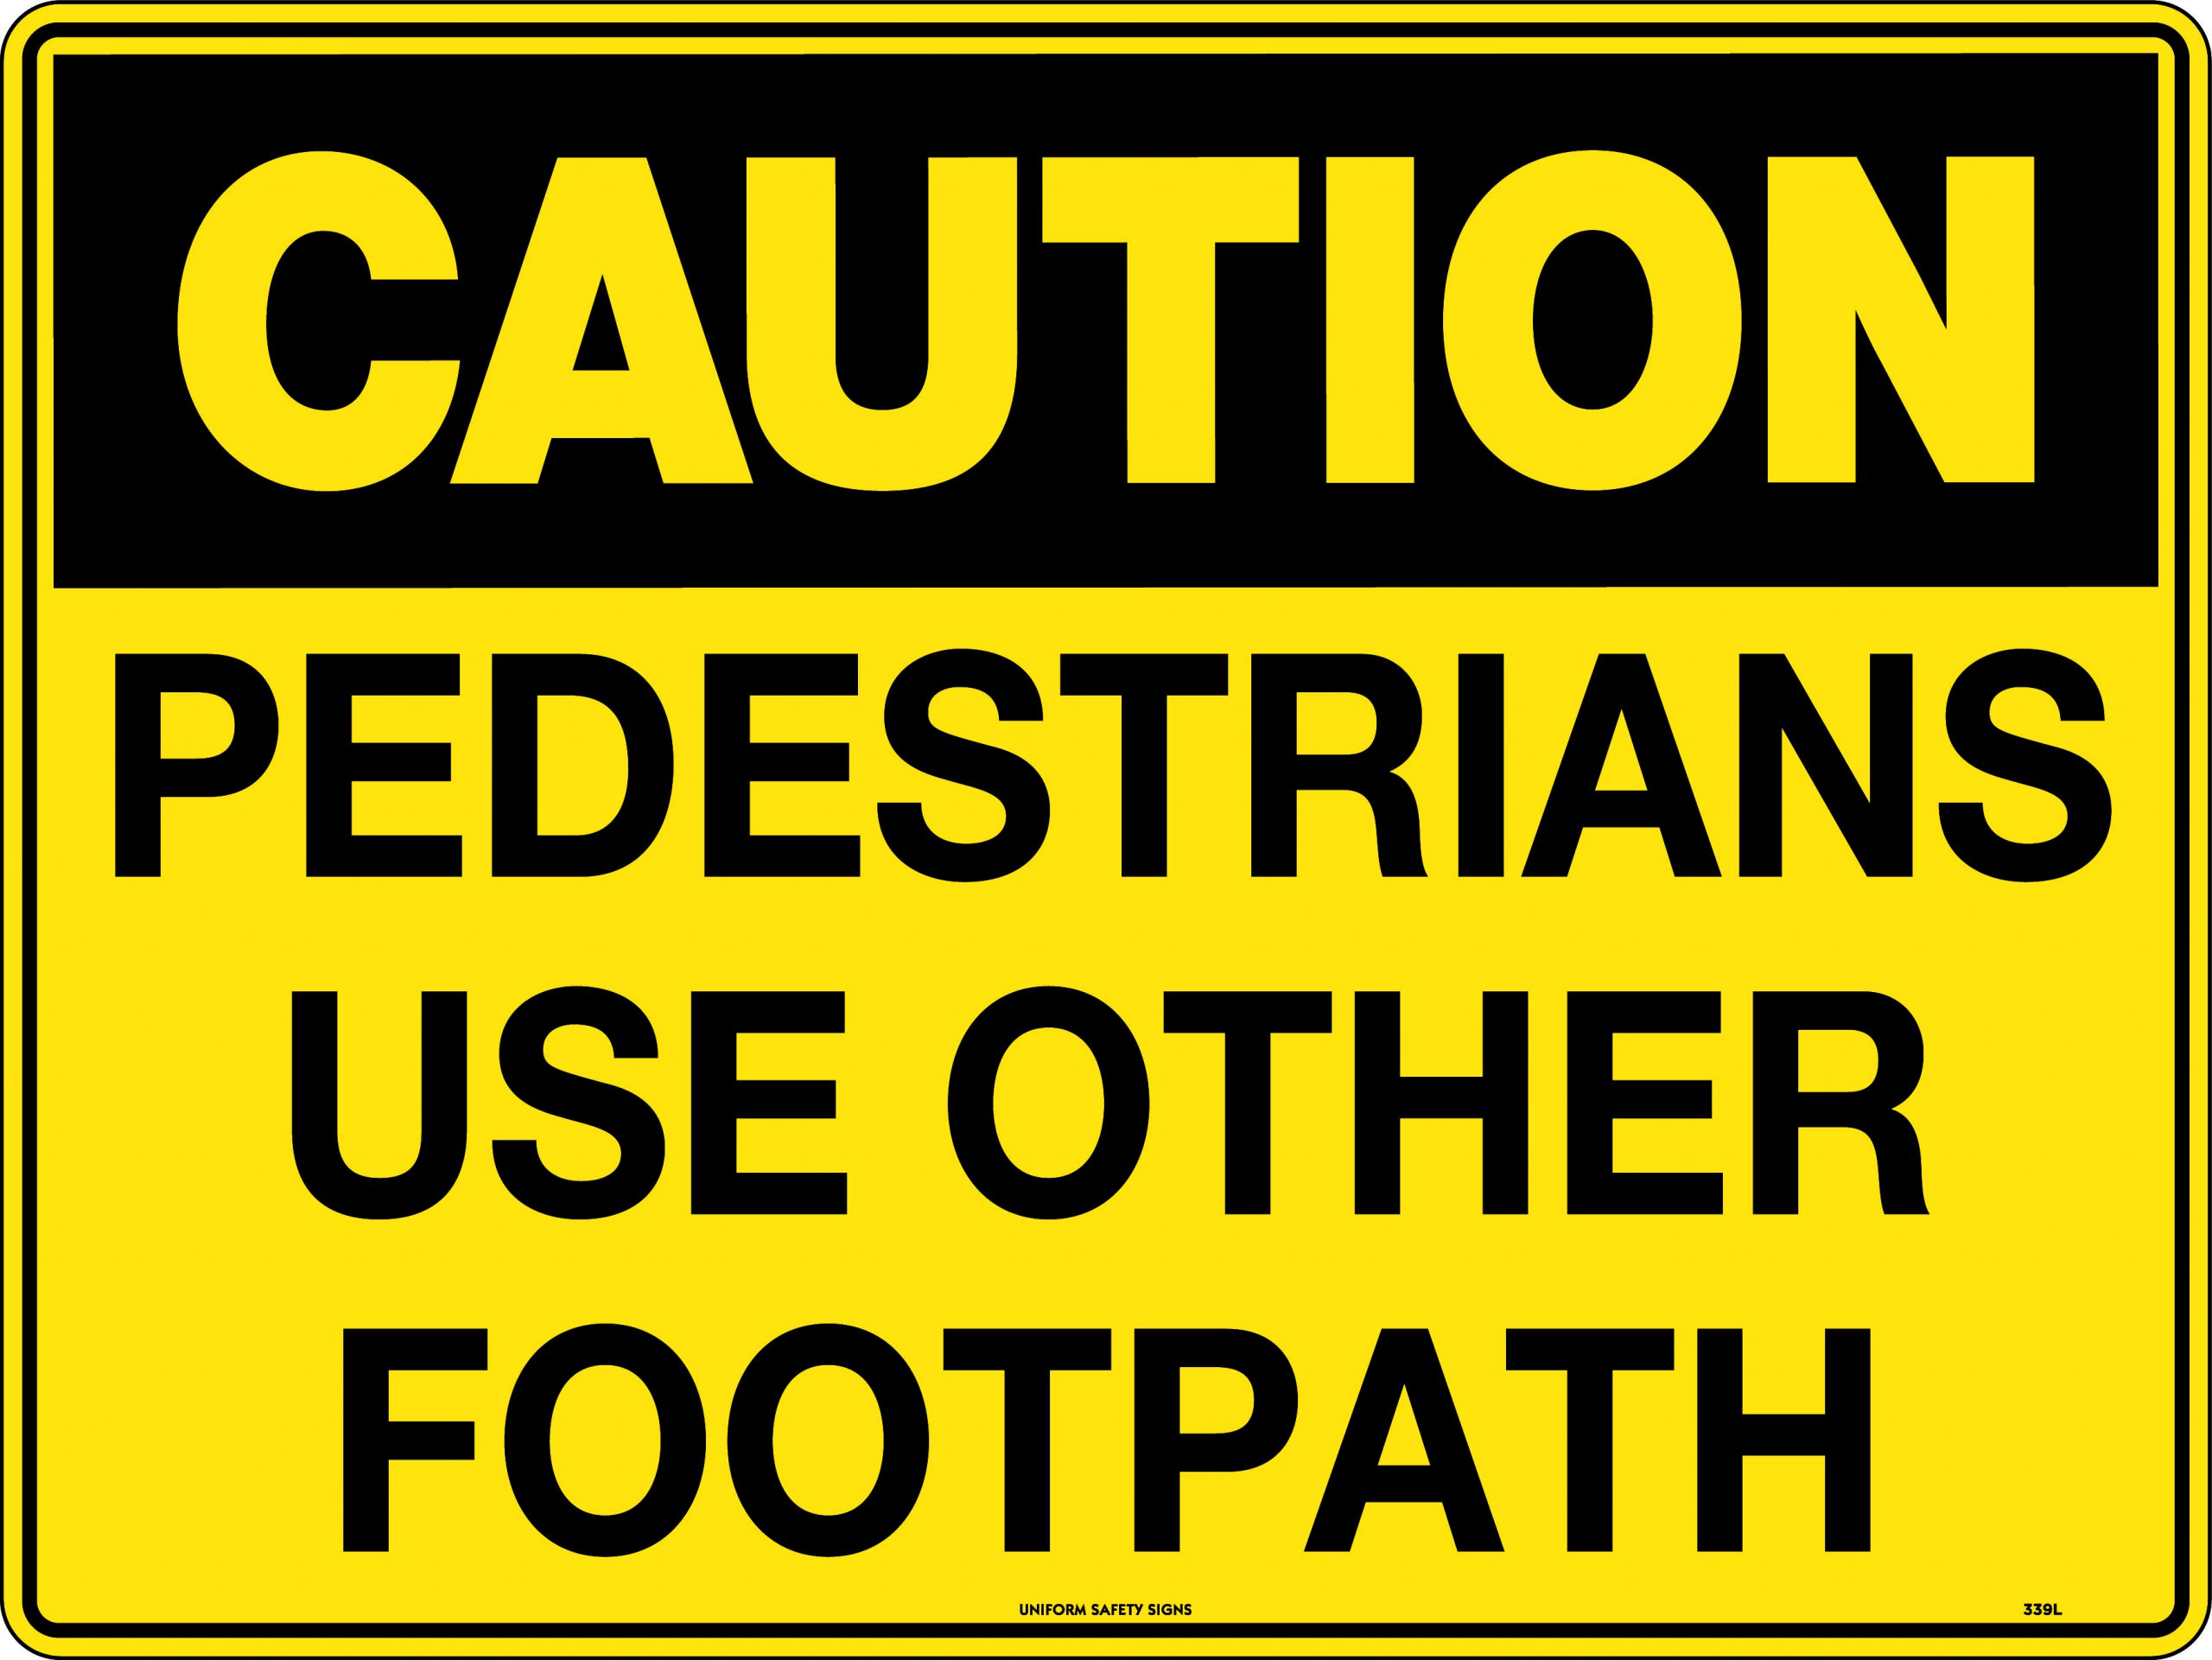 Caution Pedestrians Use Other Footpath Safety Sign 600x450mm Metal 